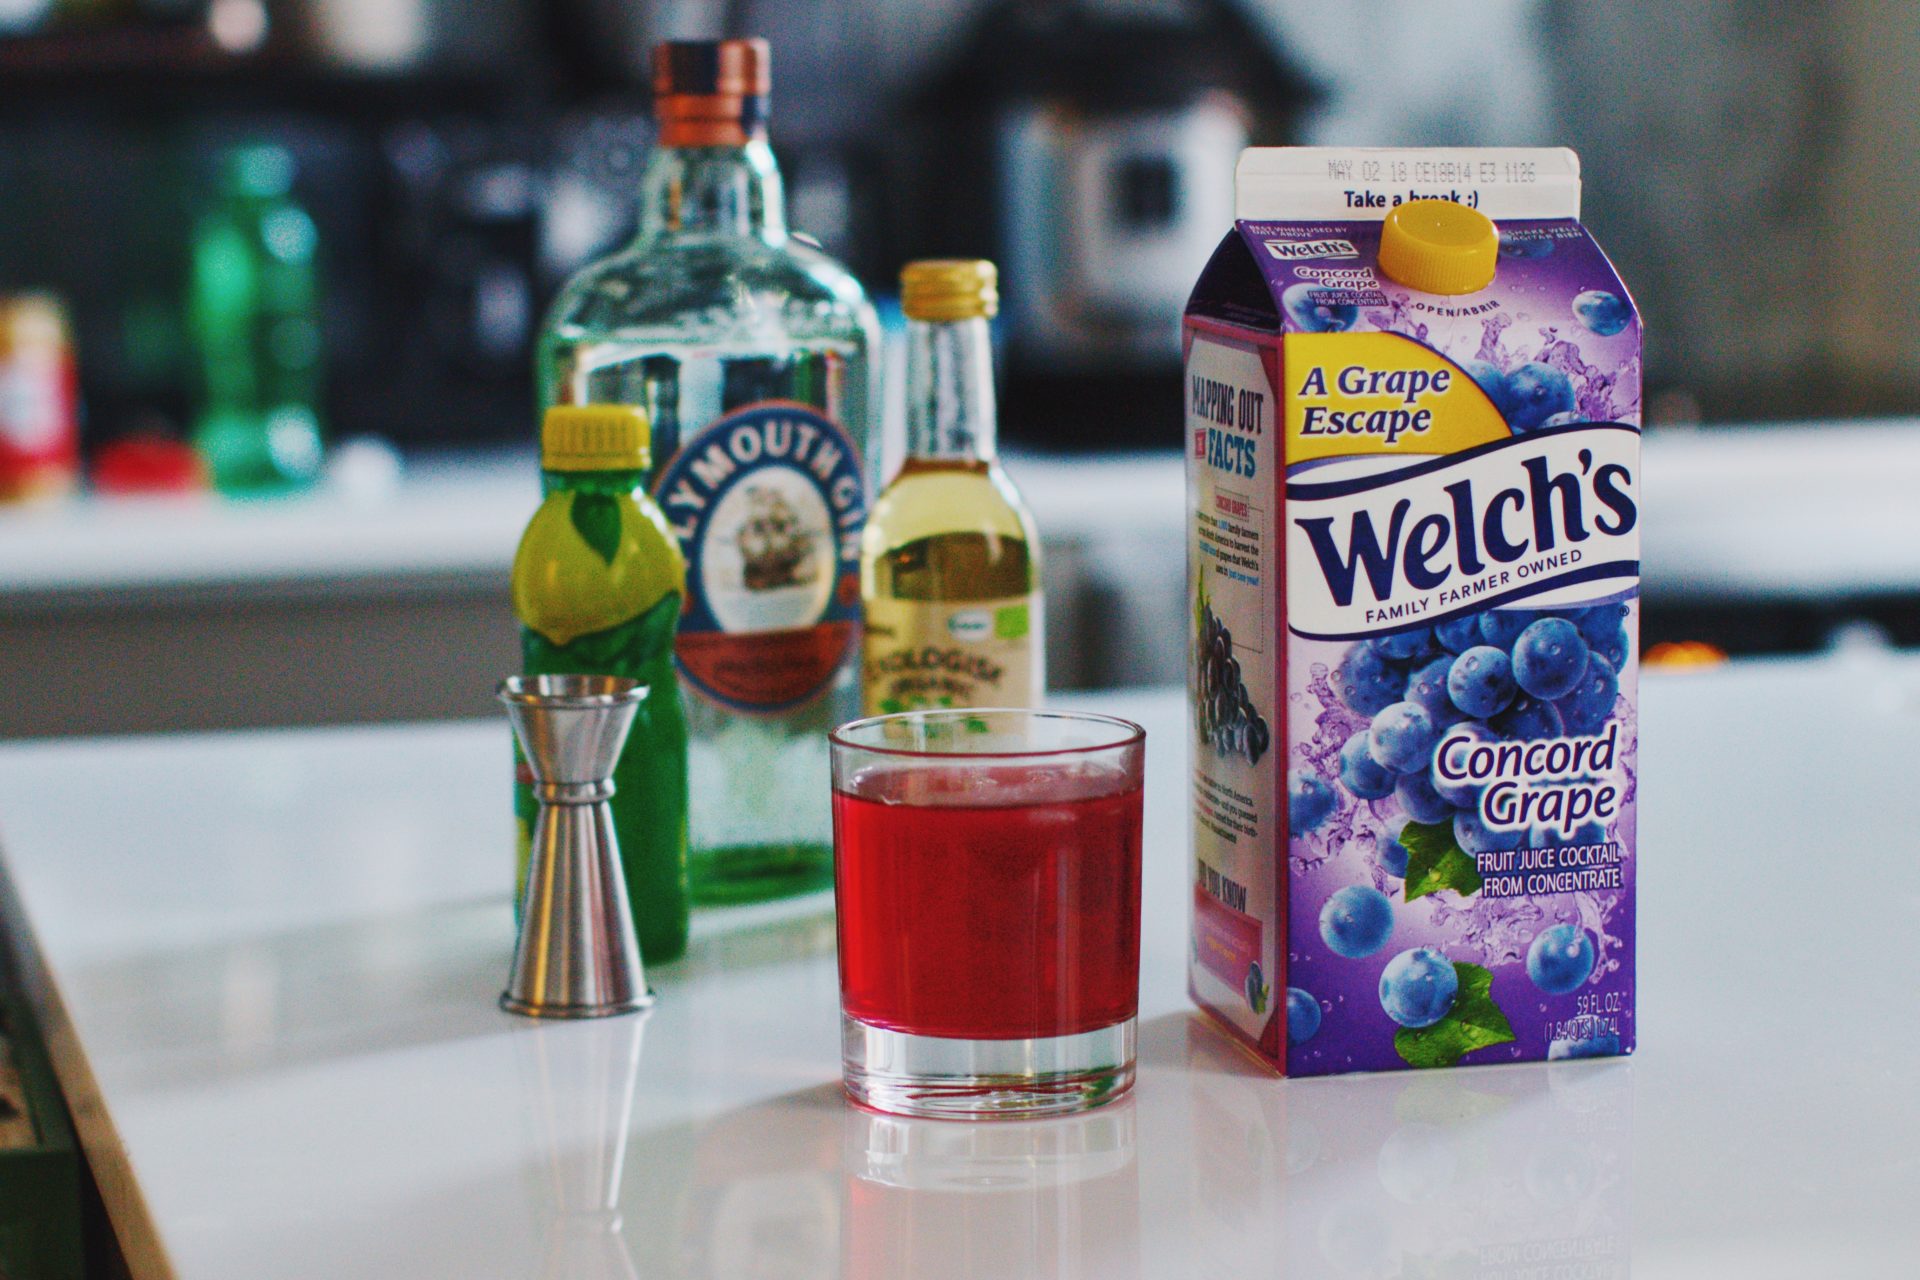 EASY TO MAKE COCKTAIL WITH Welch’s Refrigerated Cocktails - dandy in the bronx